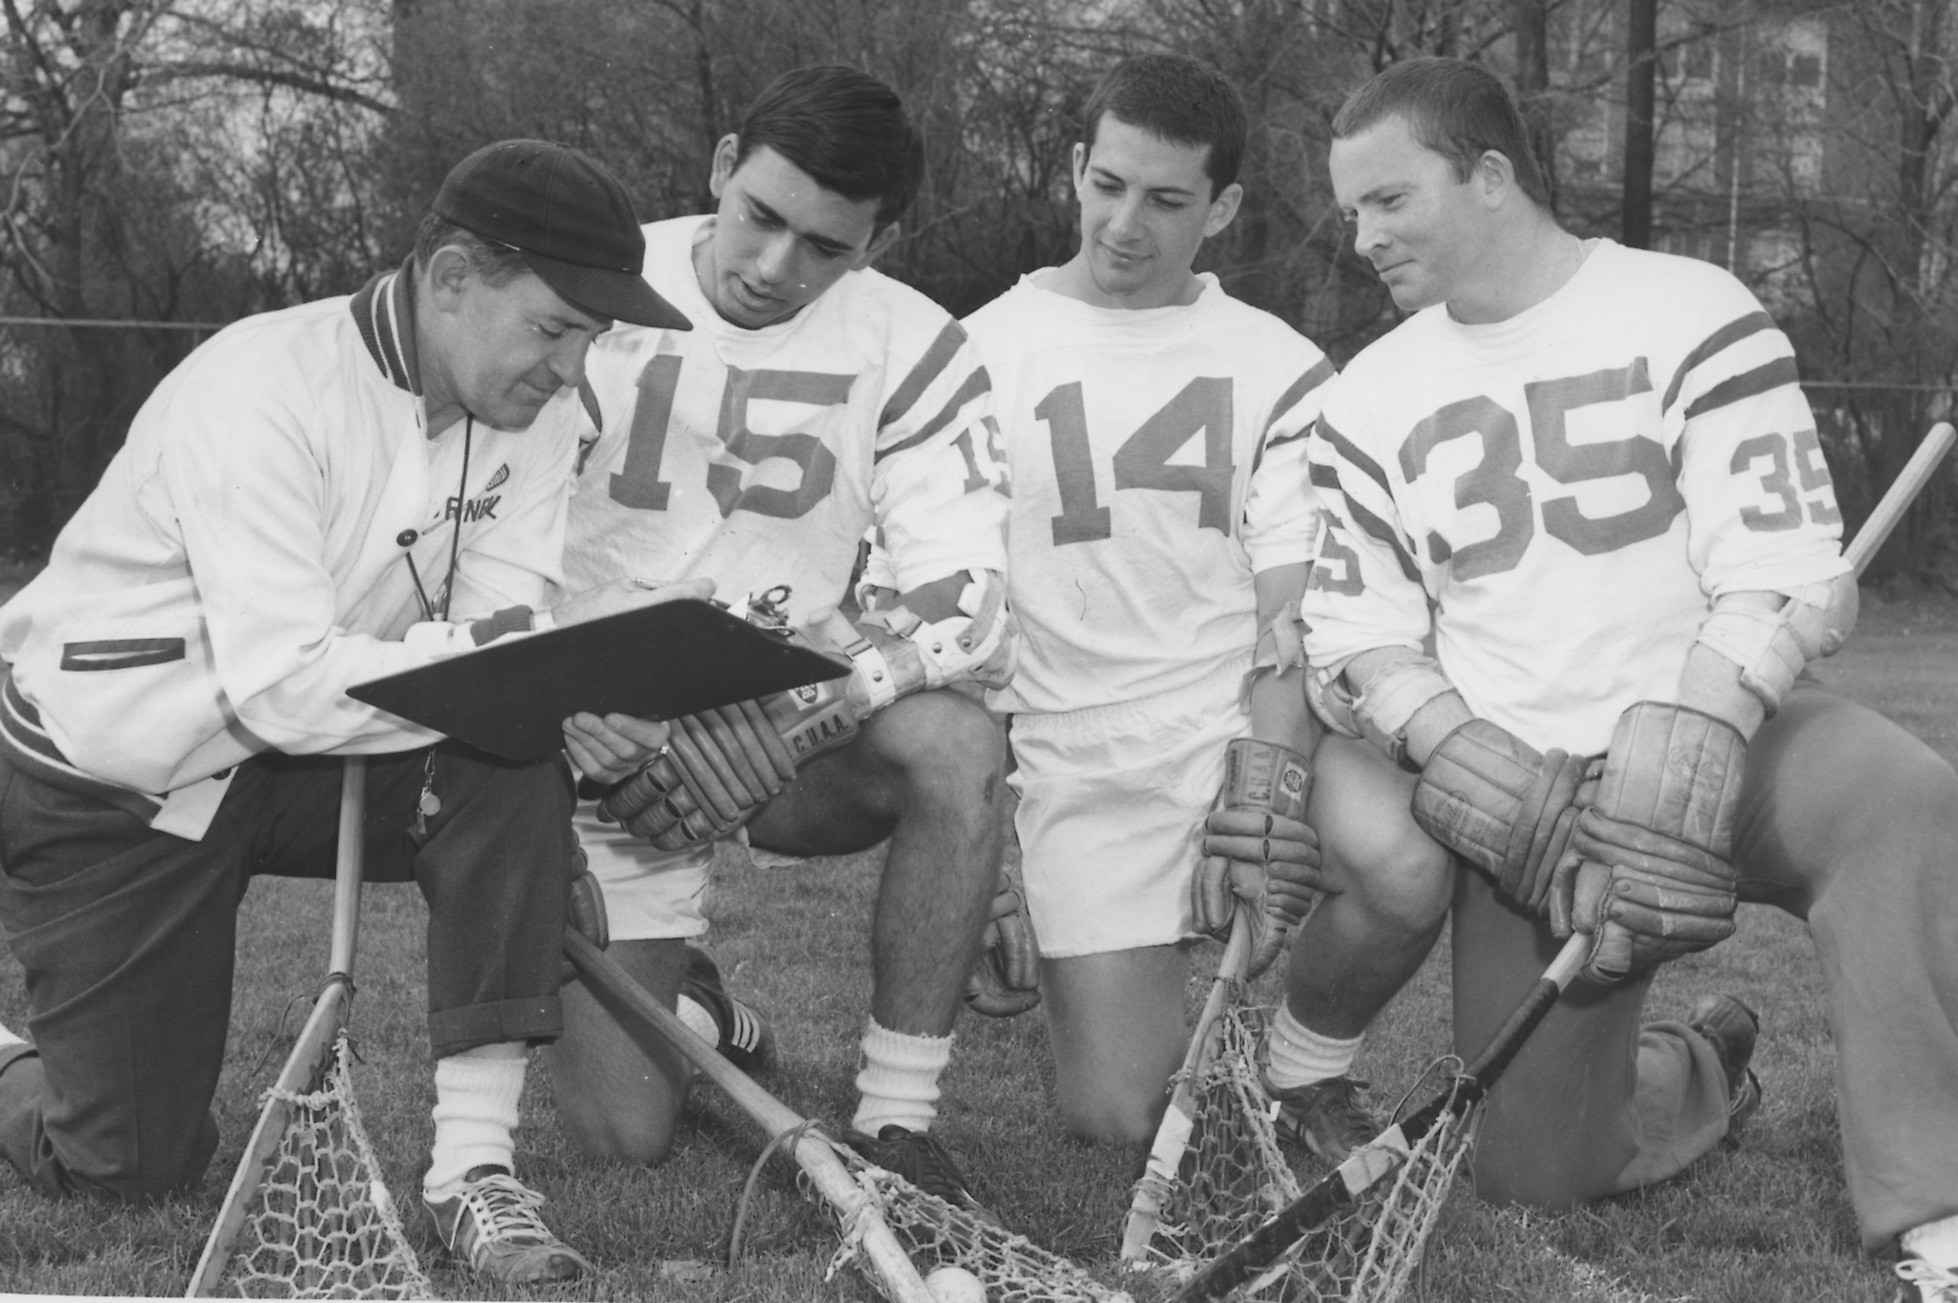 Ned Harkness with lacrosse players